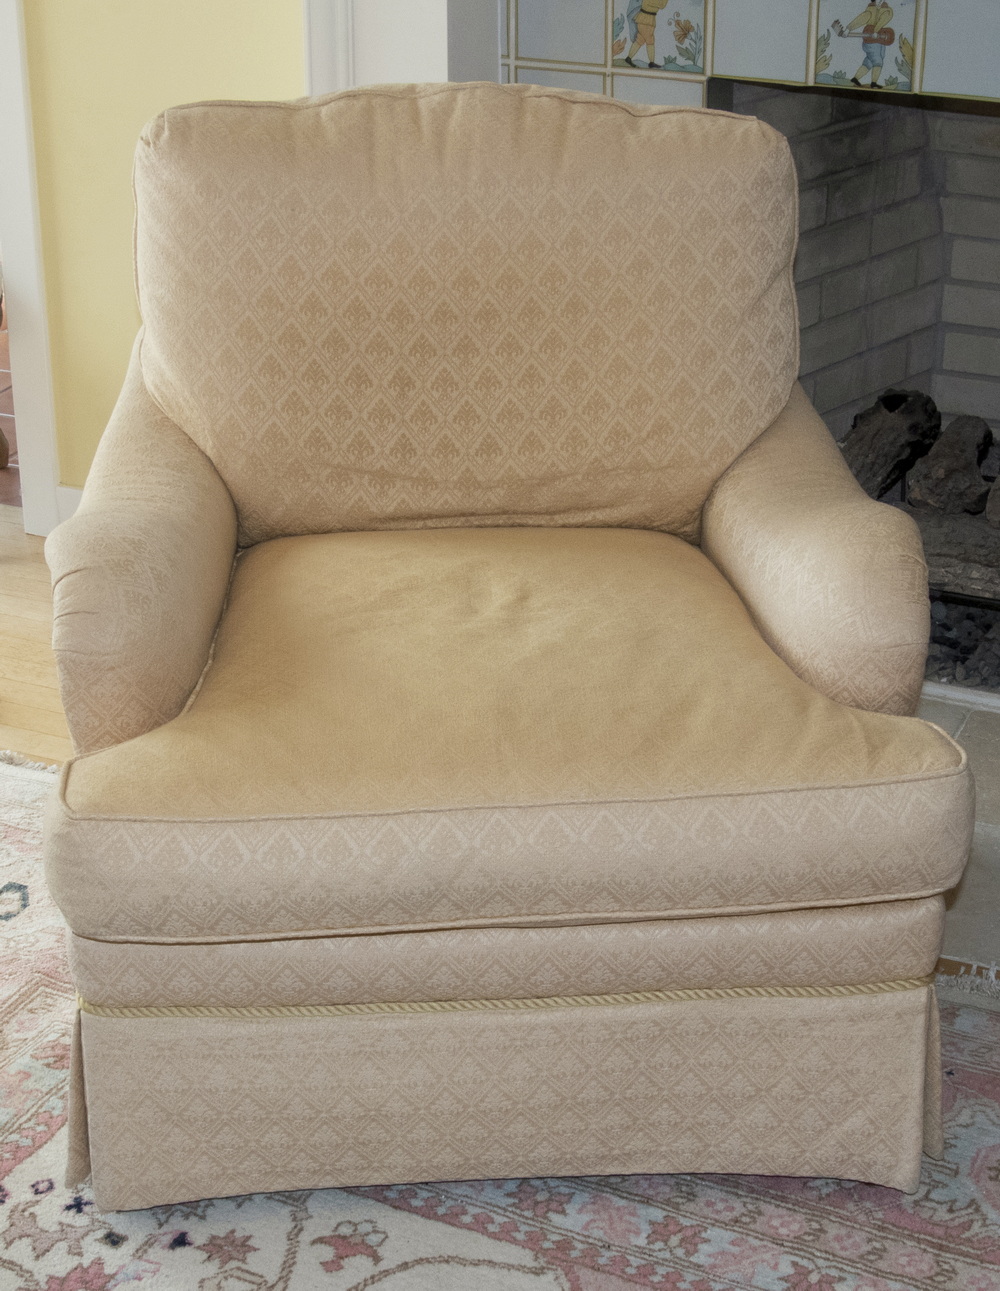 CREAM COLORED ARM CHAIR A large